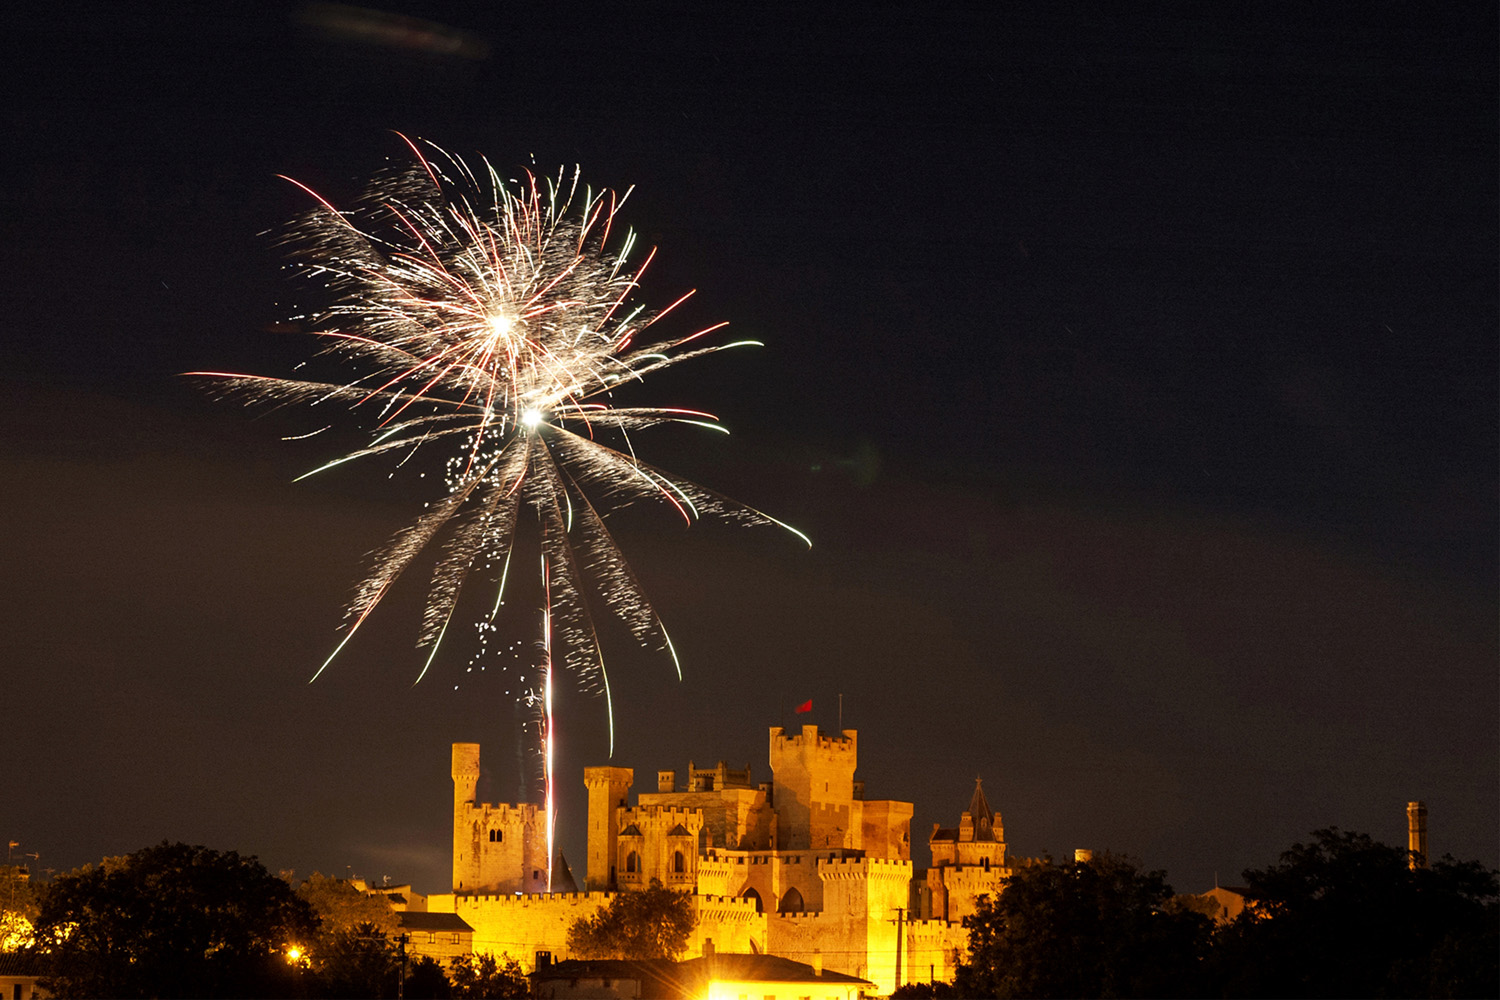 Olite Palace with fireworks